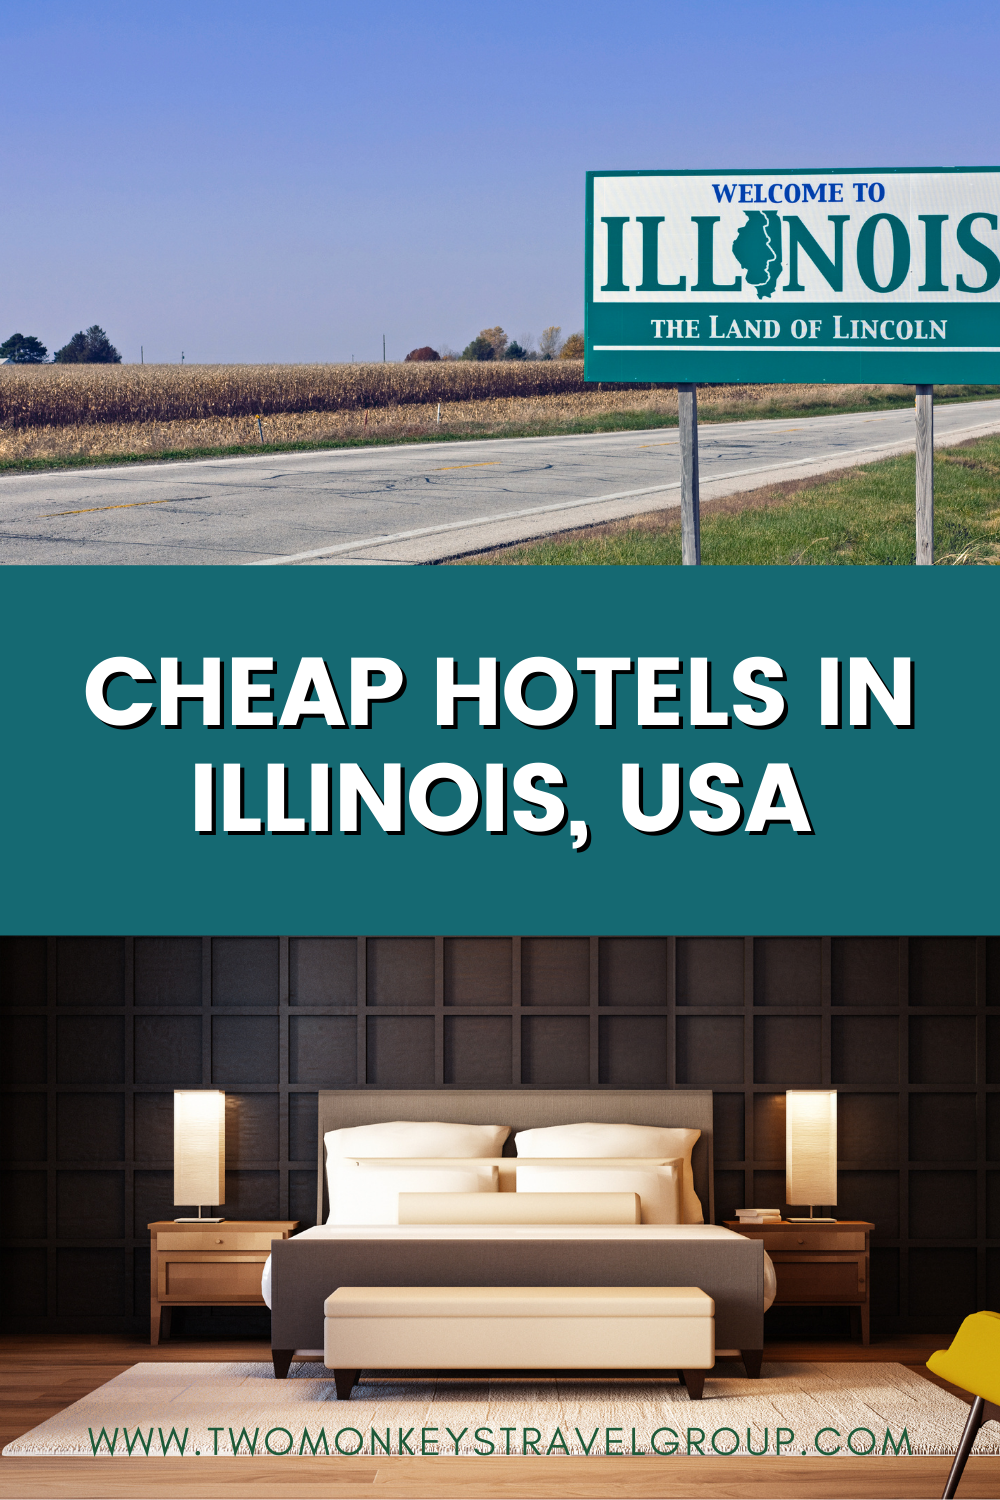 Complete List of Recommended Cheap Hotels in Illinois, USA